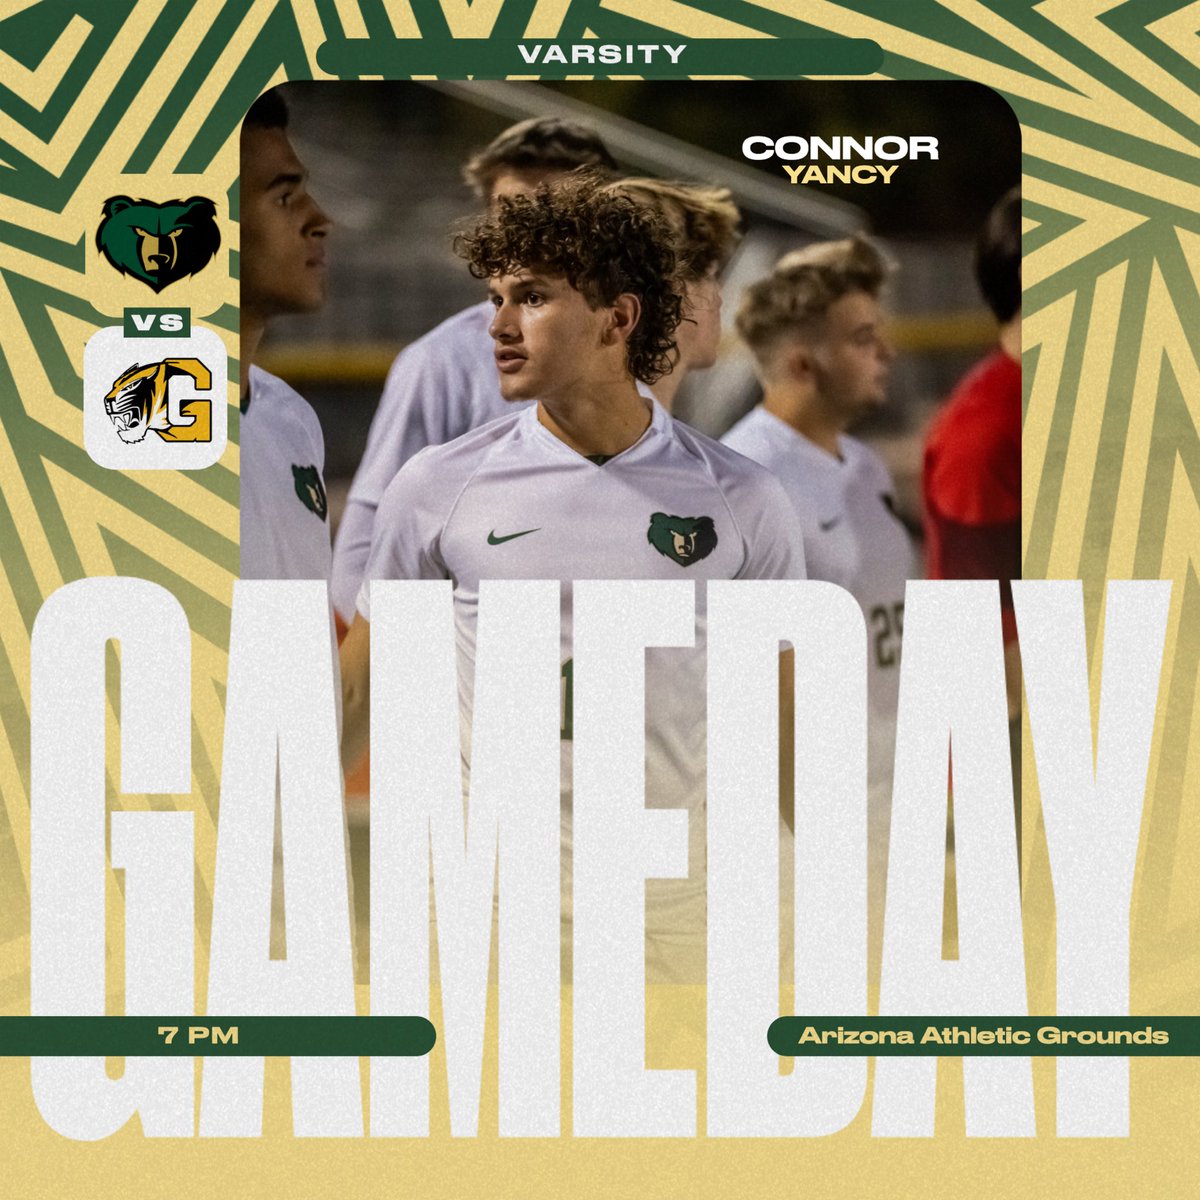 Varsity will be in a Play-In Game vs Gilbert tonight at Arizona Athletic Grounds (formerly Legacy) for the postseason!

#GoBears #BashaBoysSoccer #BuildingBasha